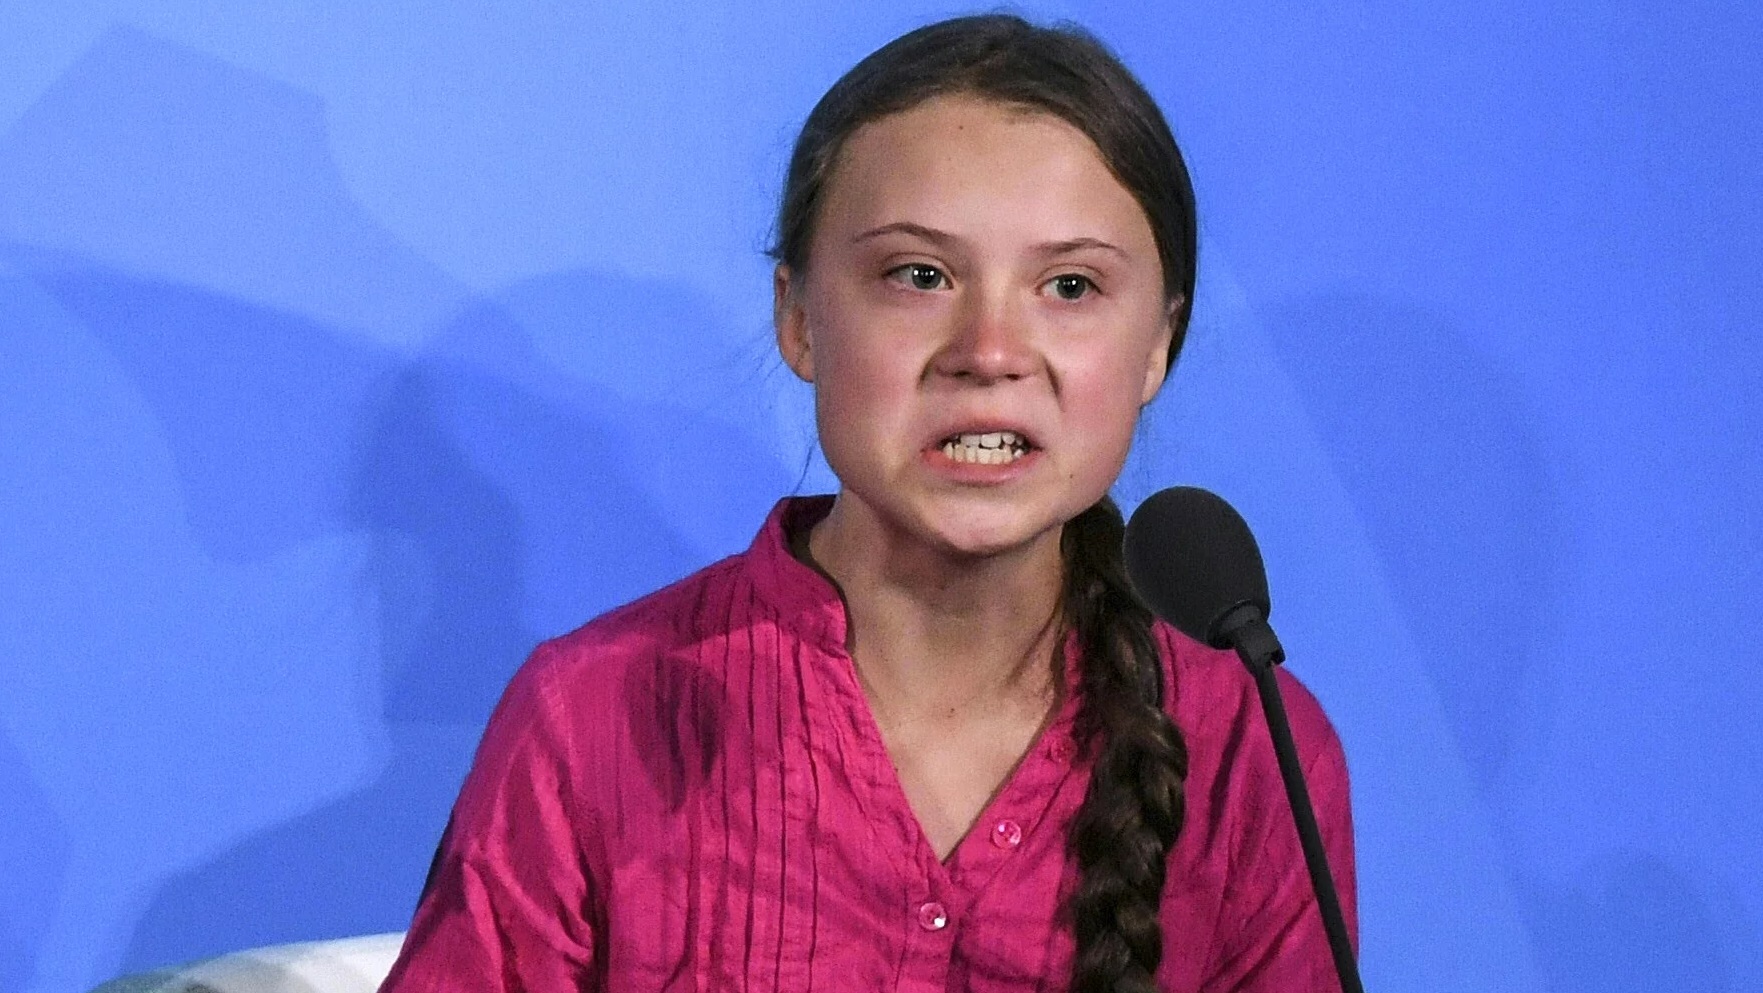 Image: College professor pens scathing and brilliant ‘open letter’ to teen climate activist Greta Thunberg